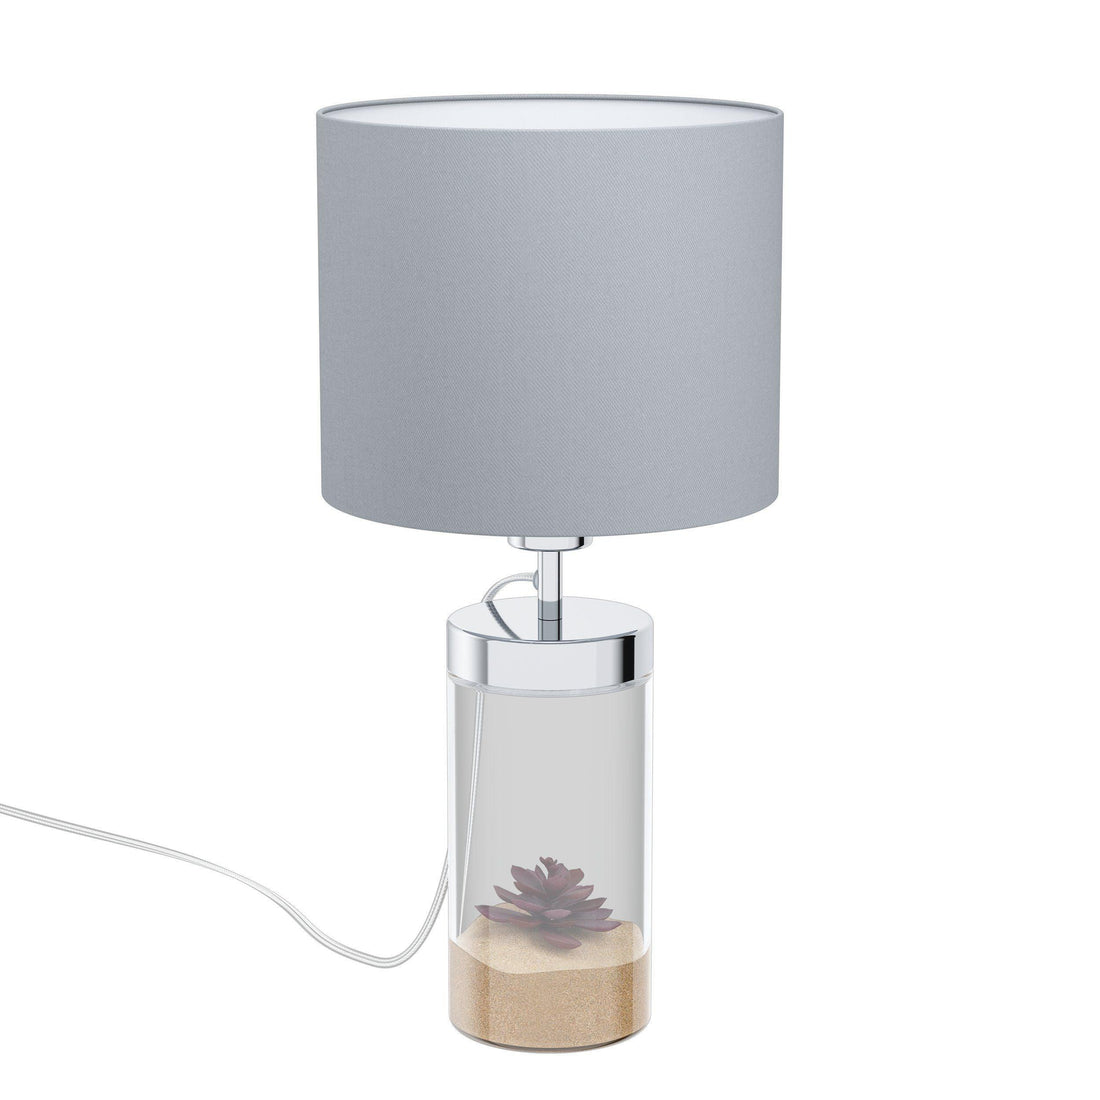 LIDSING Table Lamp by The Light Library